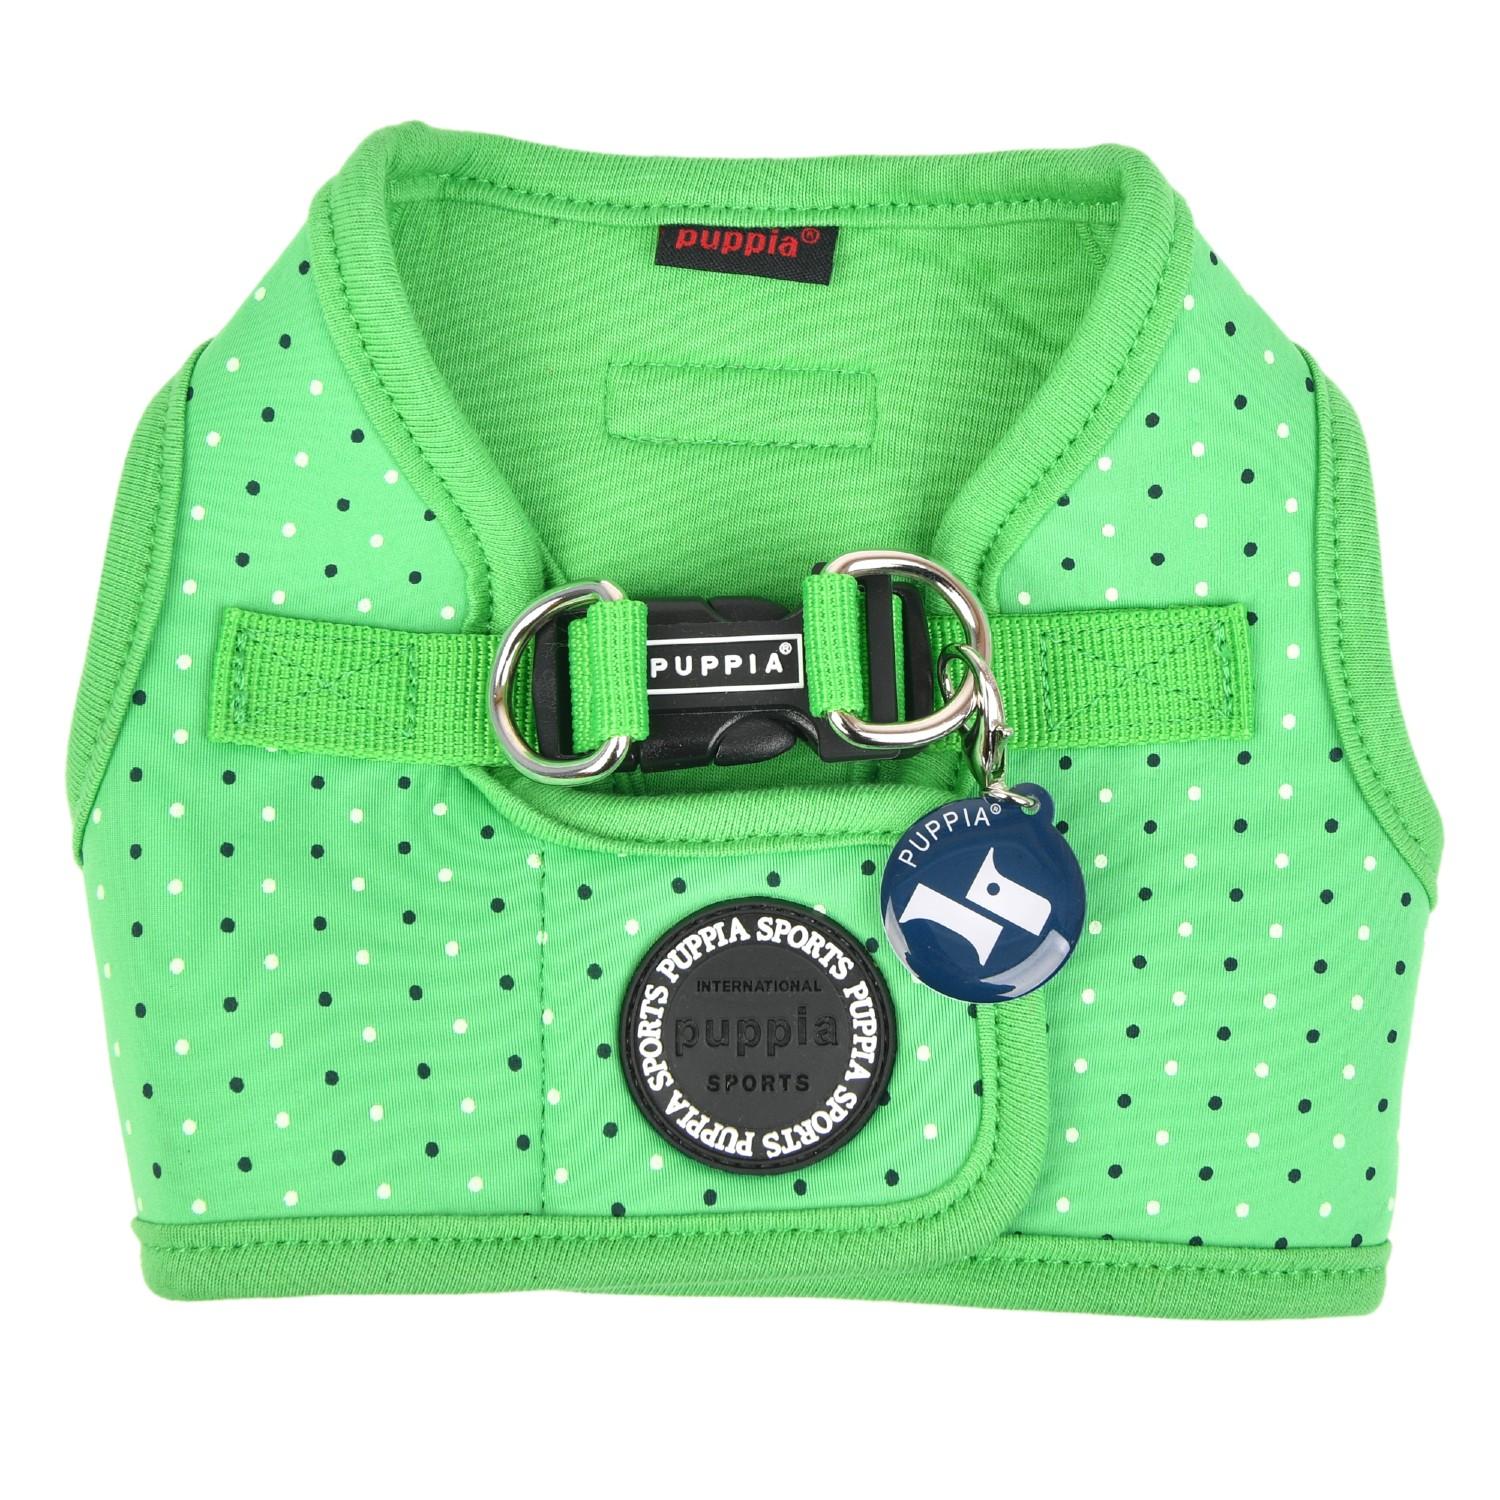 Bonnie Vest Dog Harness by Puppia - Green